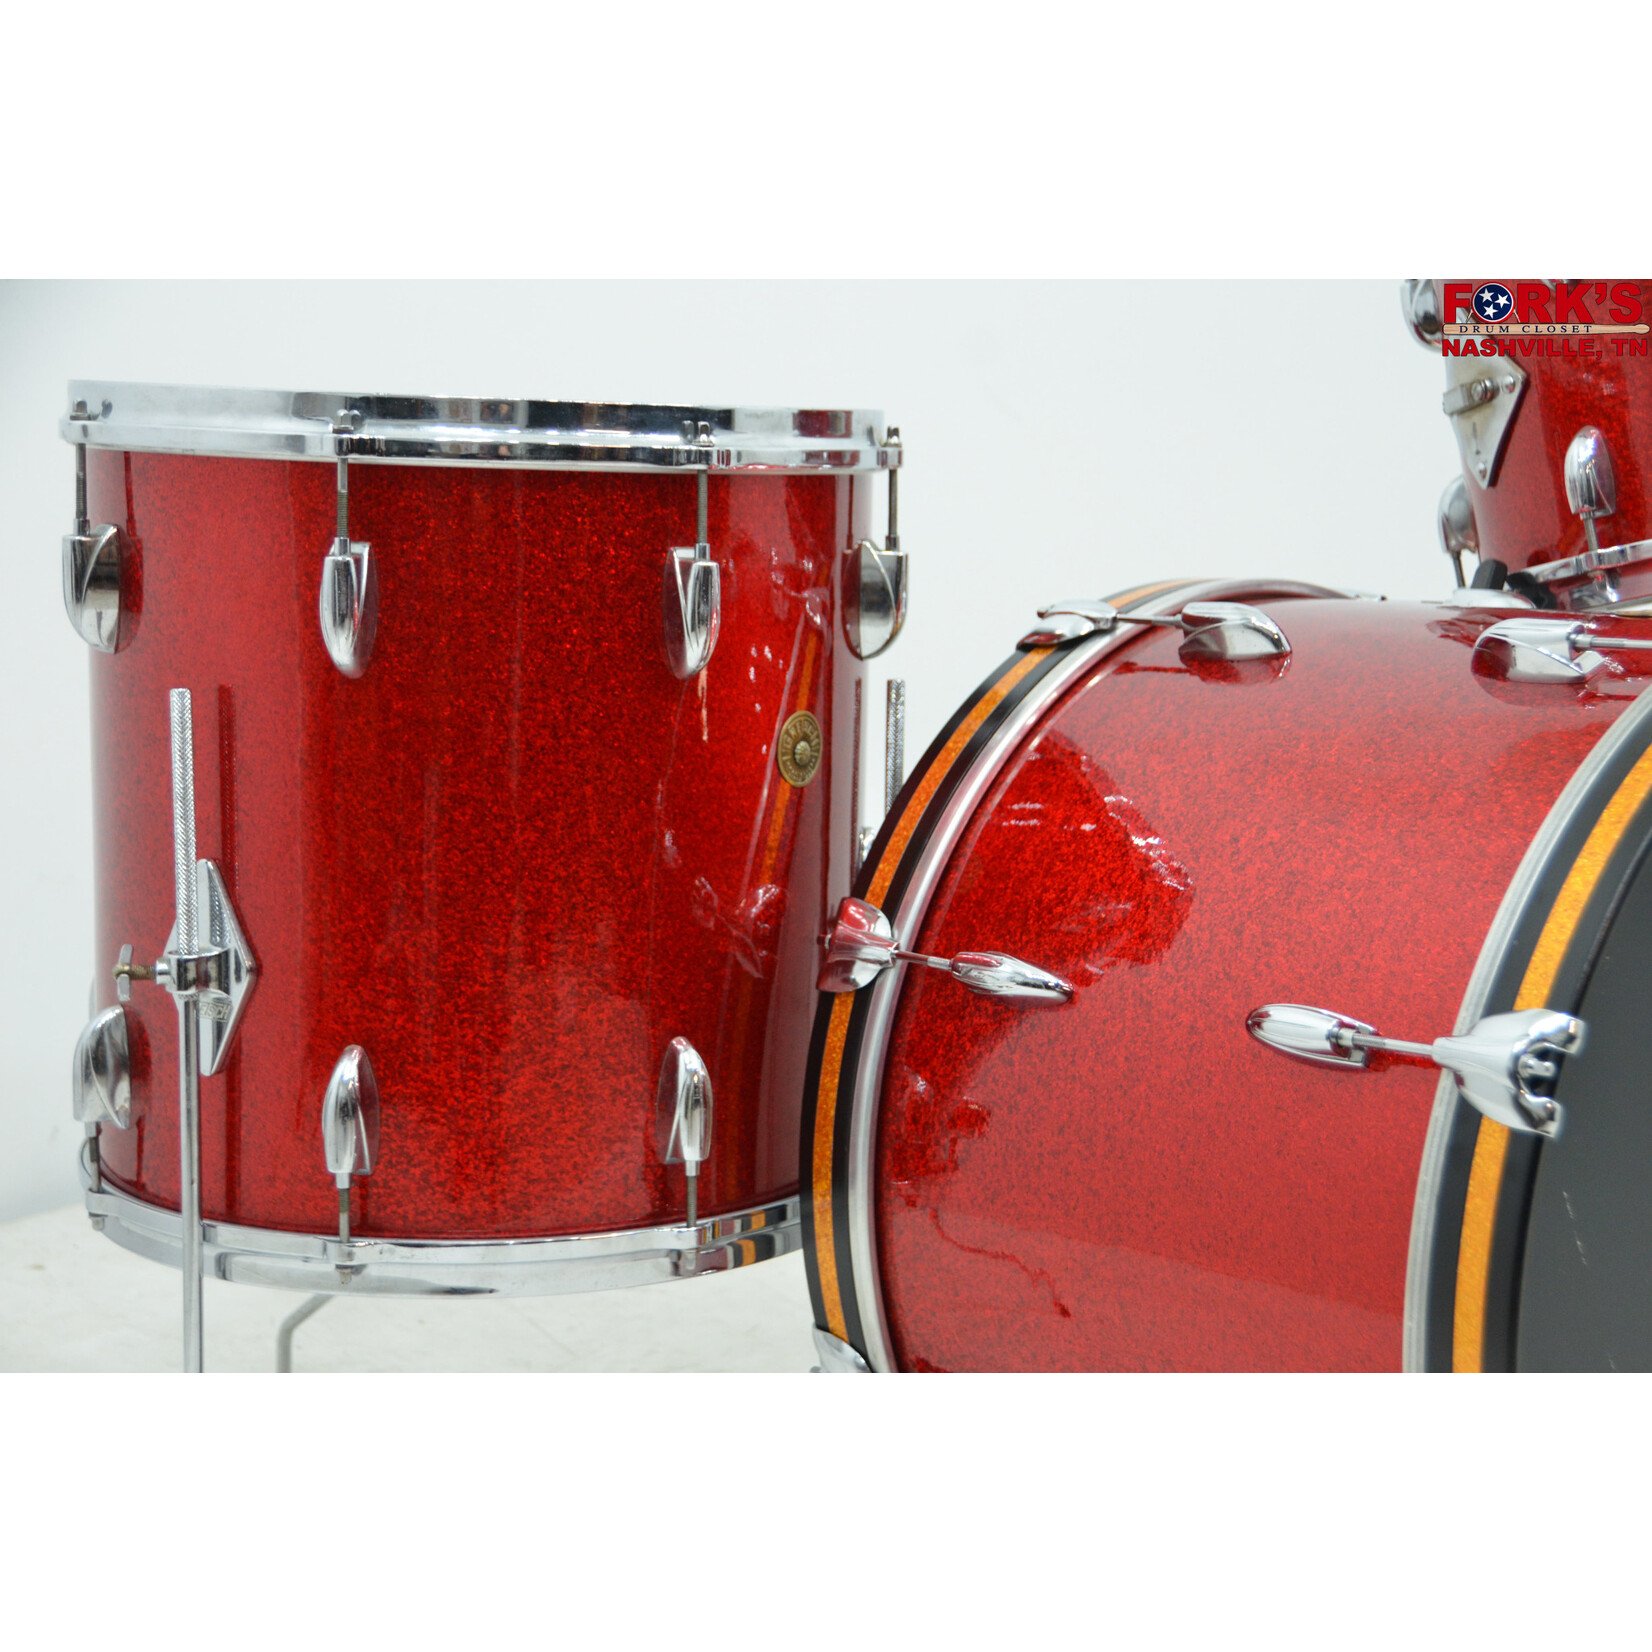 Gretsch Used 1950's/1960's Recovered Gretsch 3pc Drum Kit - "Red Sparkle"